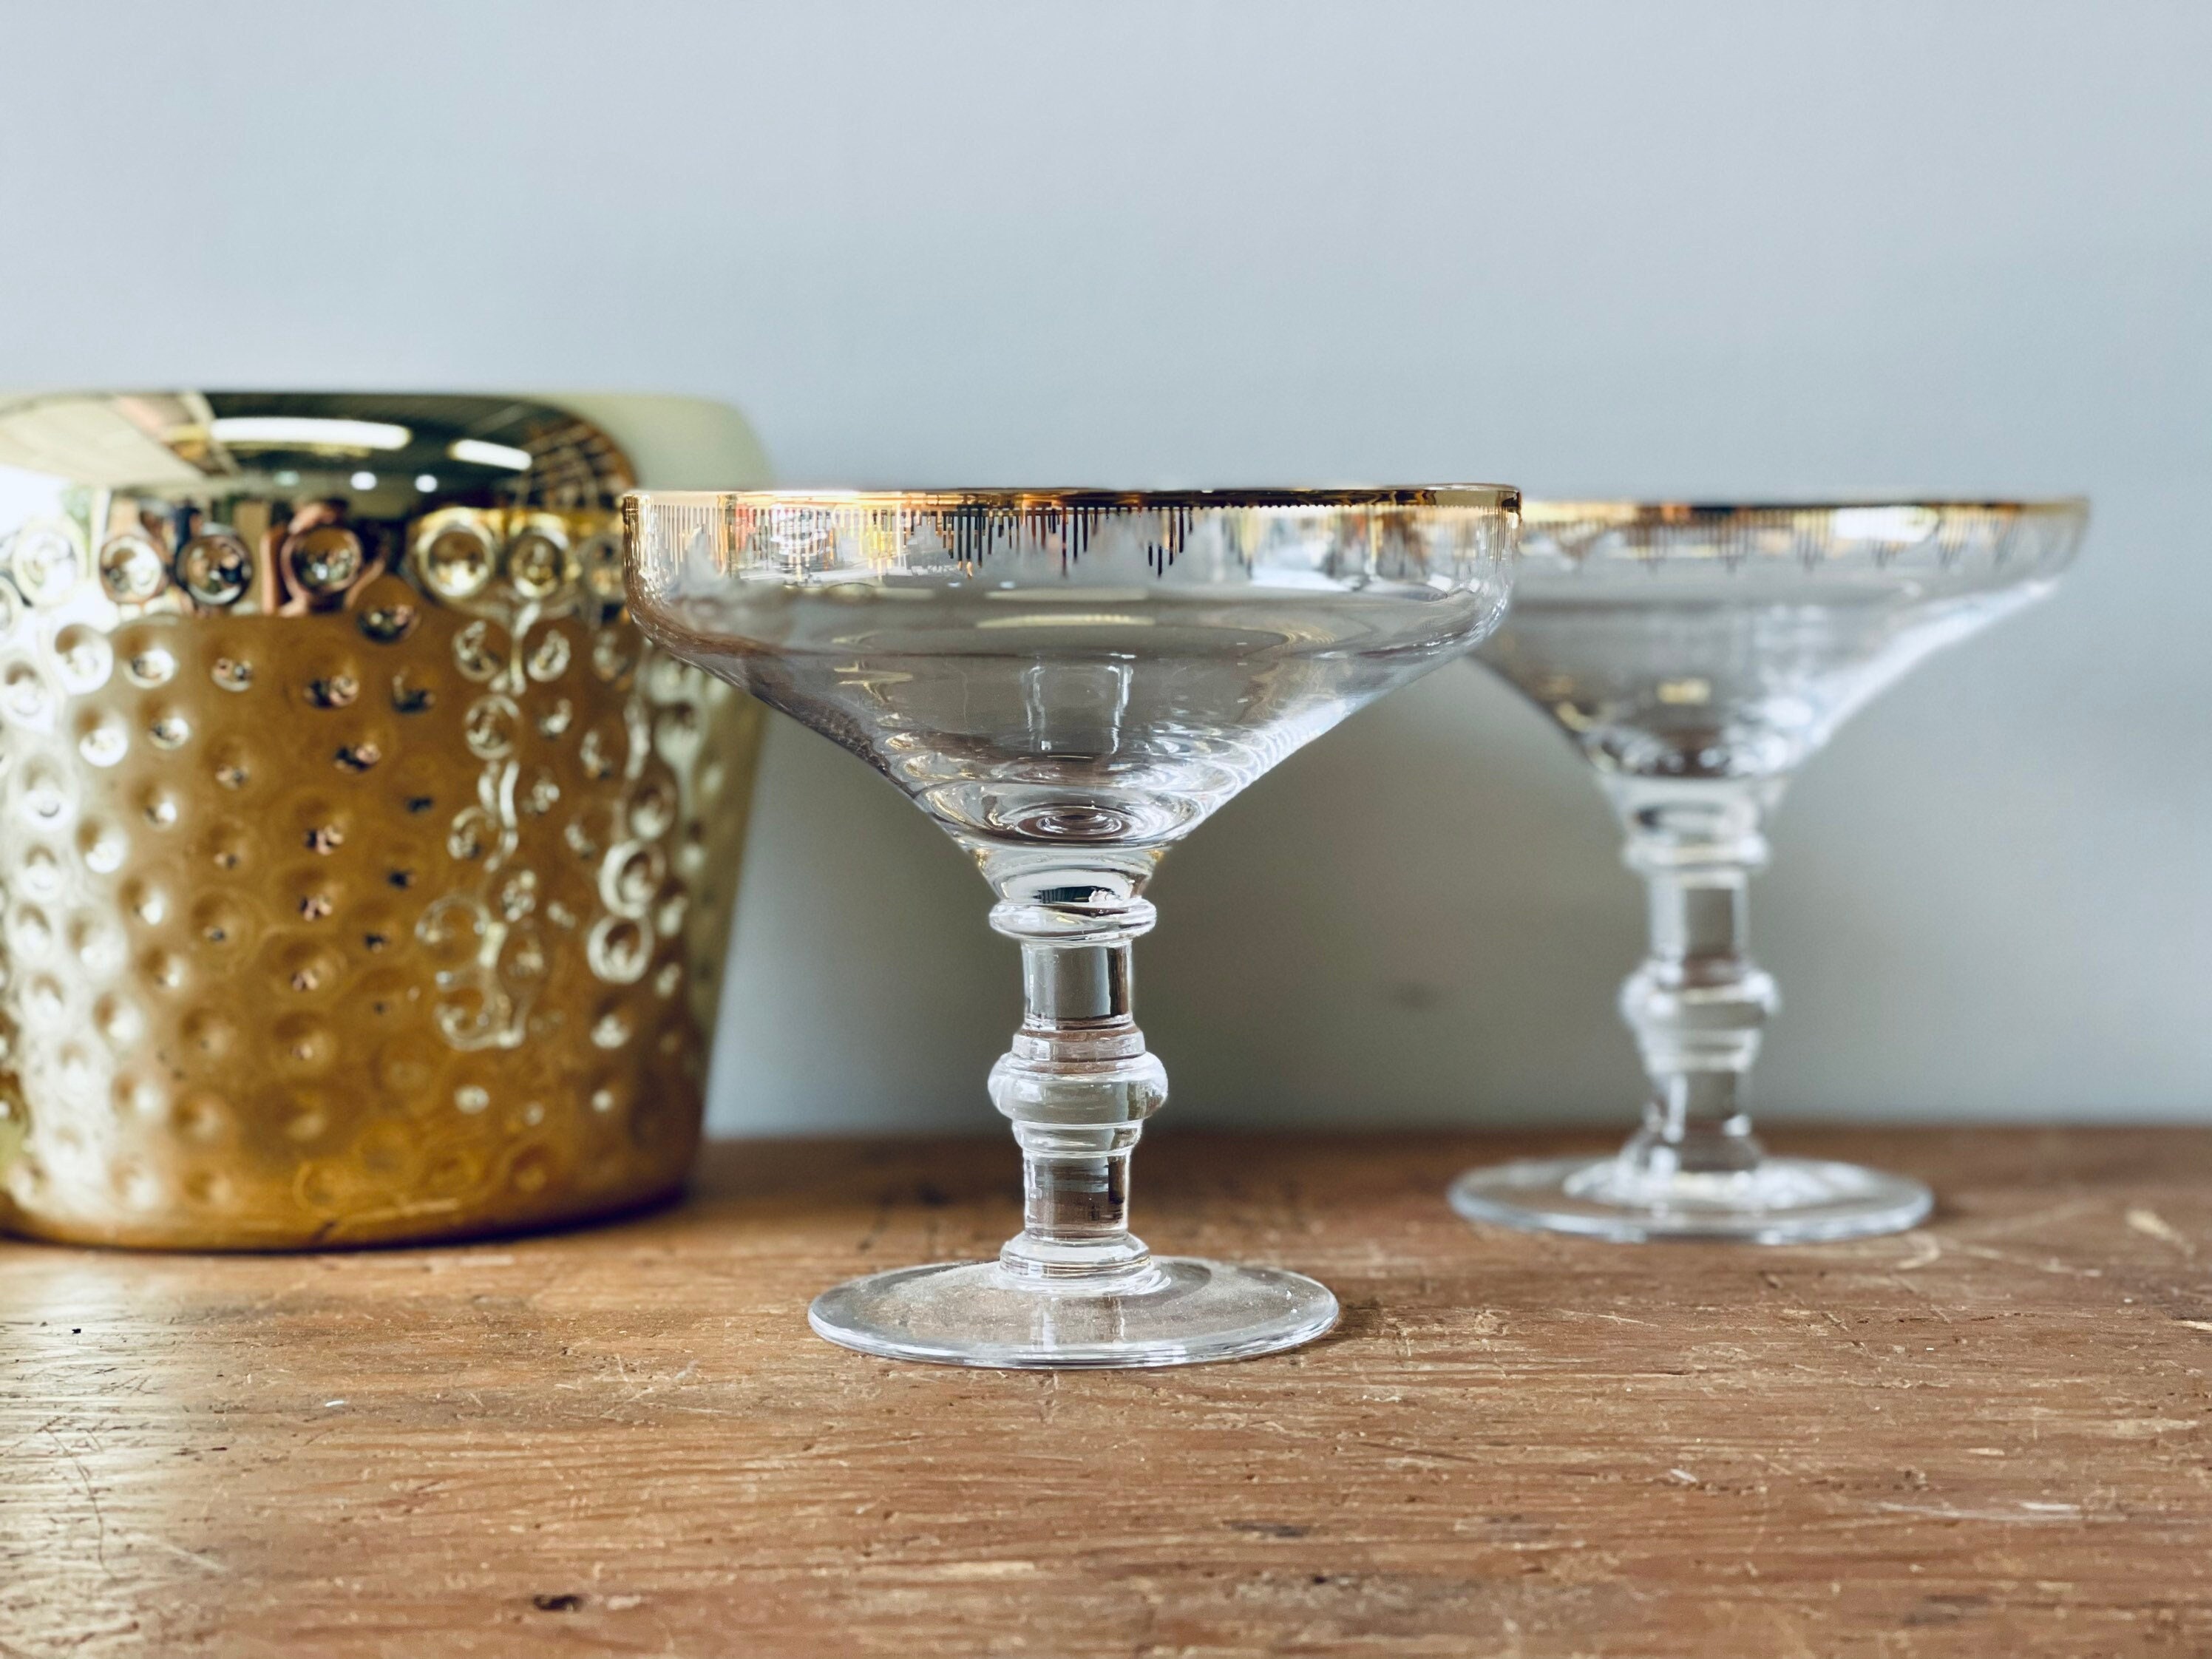 Gatsby - Stainless Steel Martini Glass